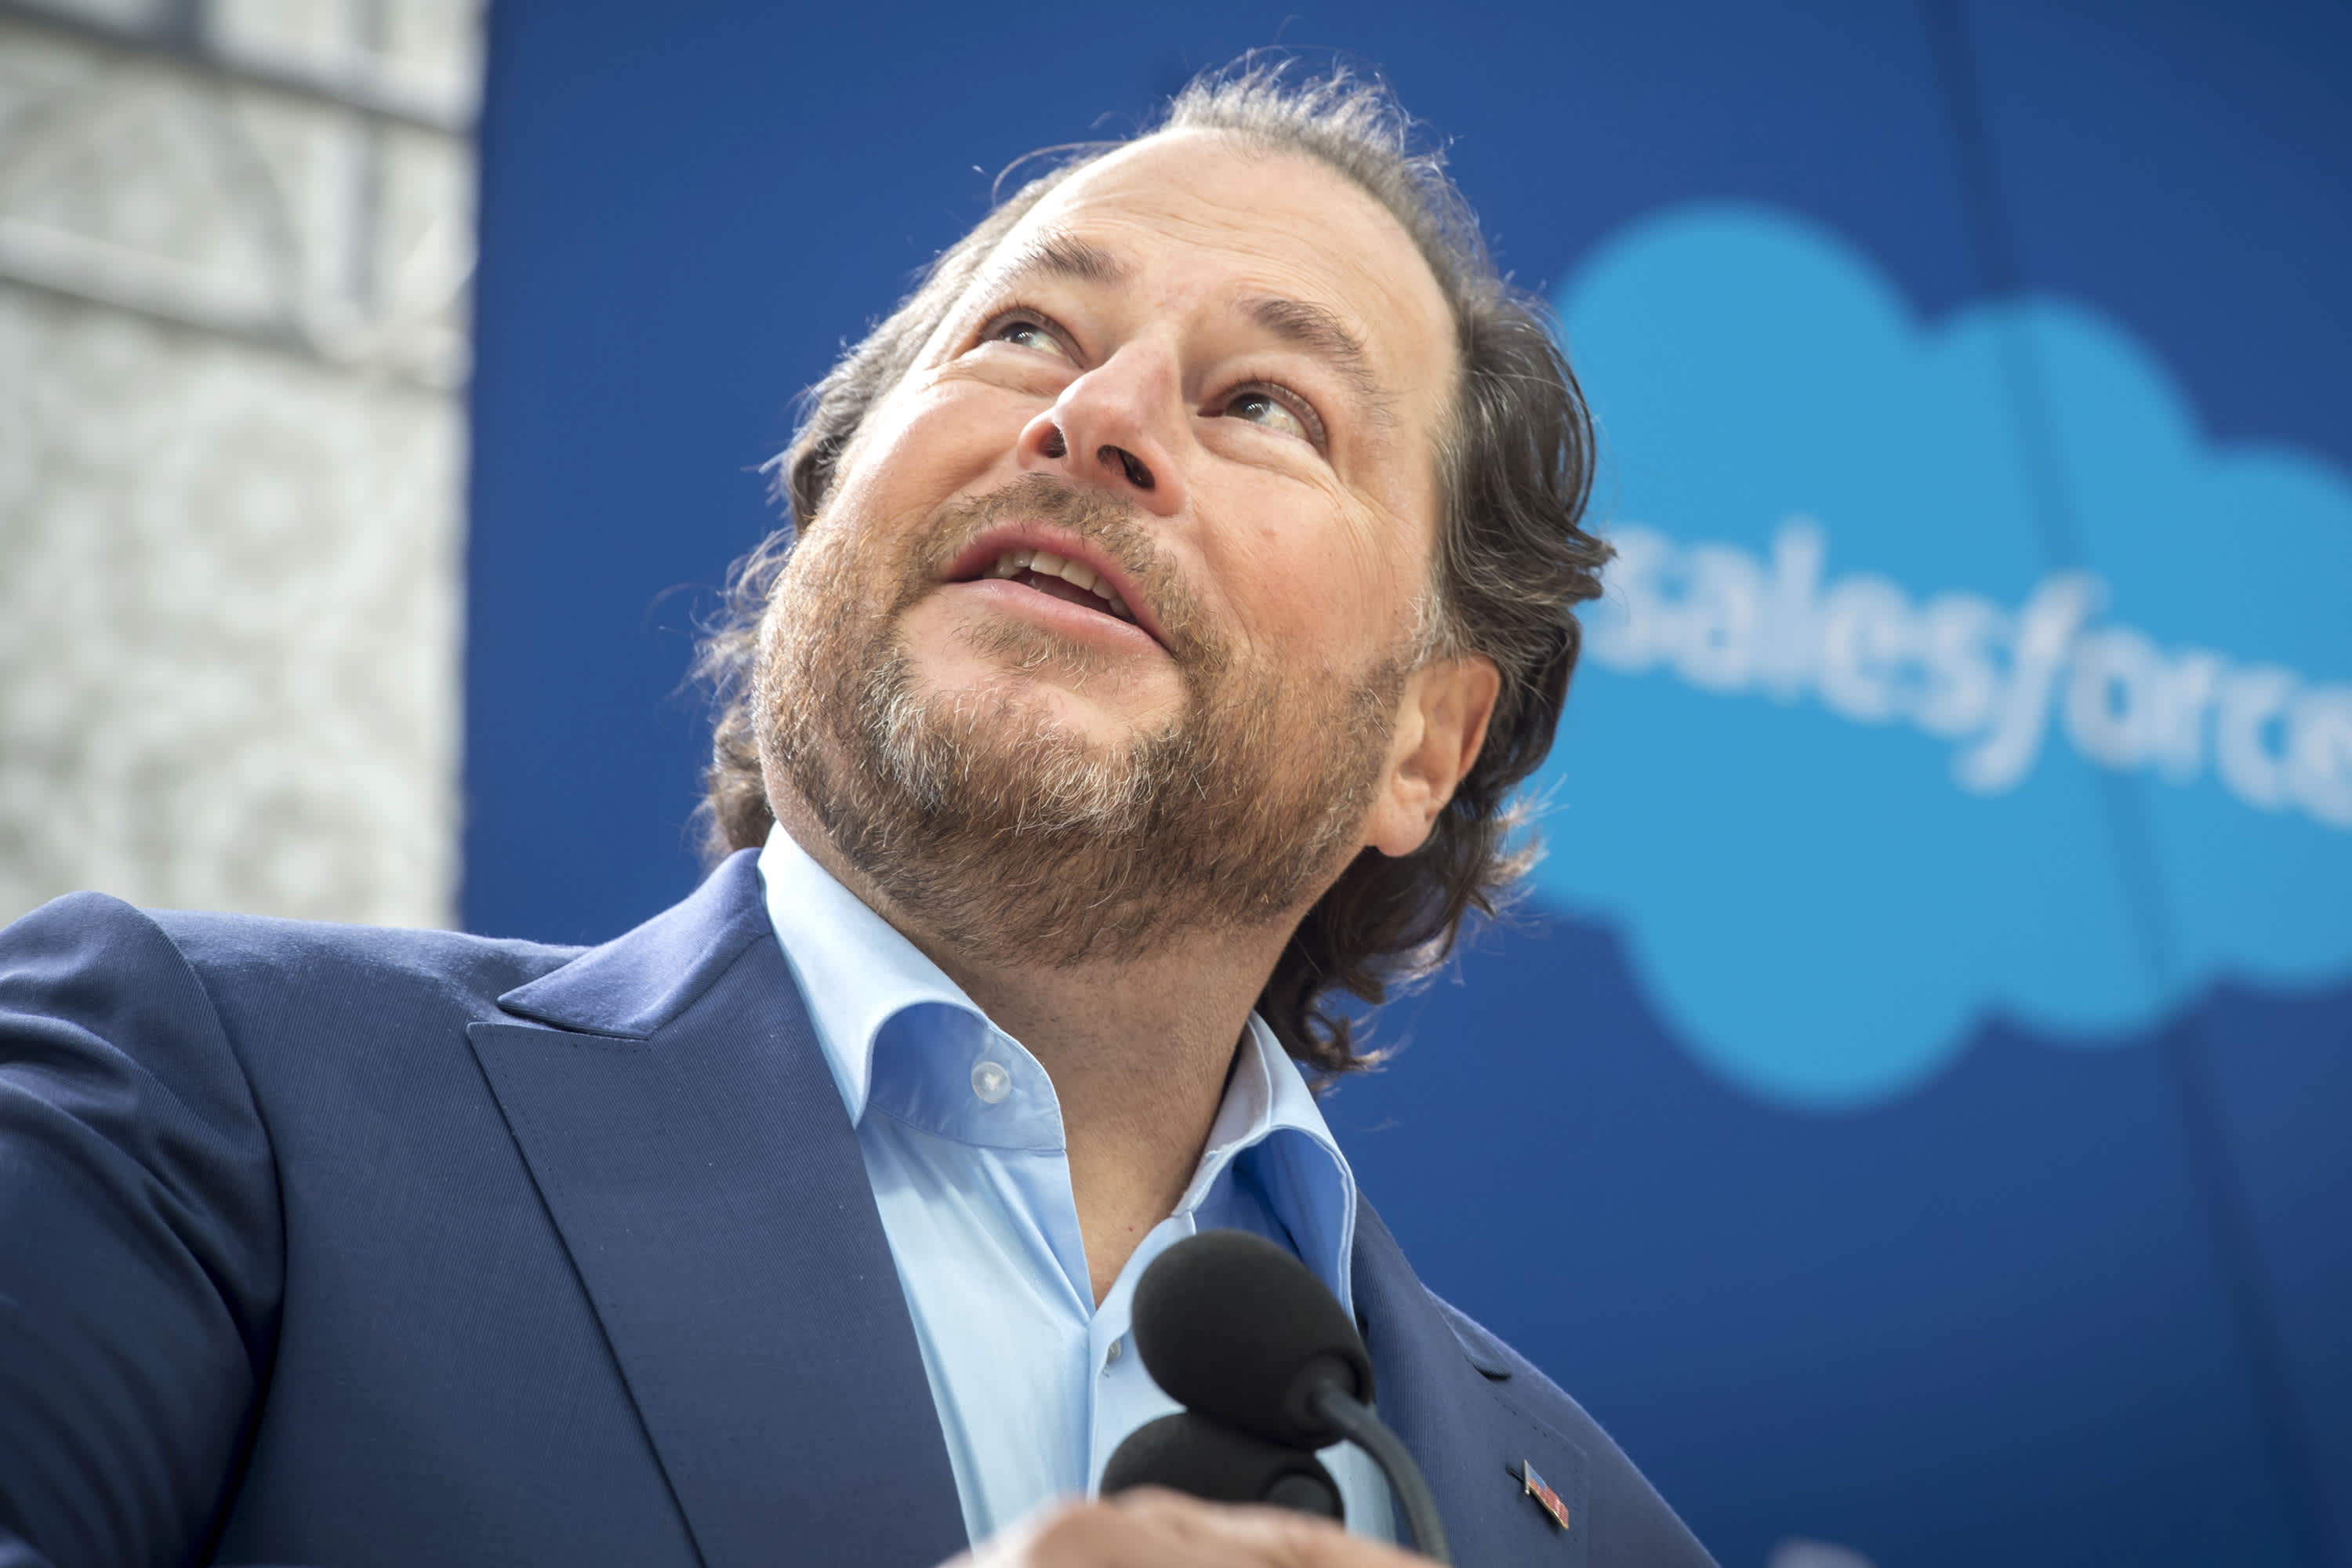 Salesforce co-CEO Marc Benioff touts strong sales guidance, says ‘$ 30 billions are now ahead of us’